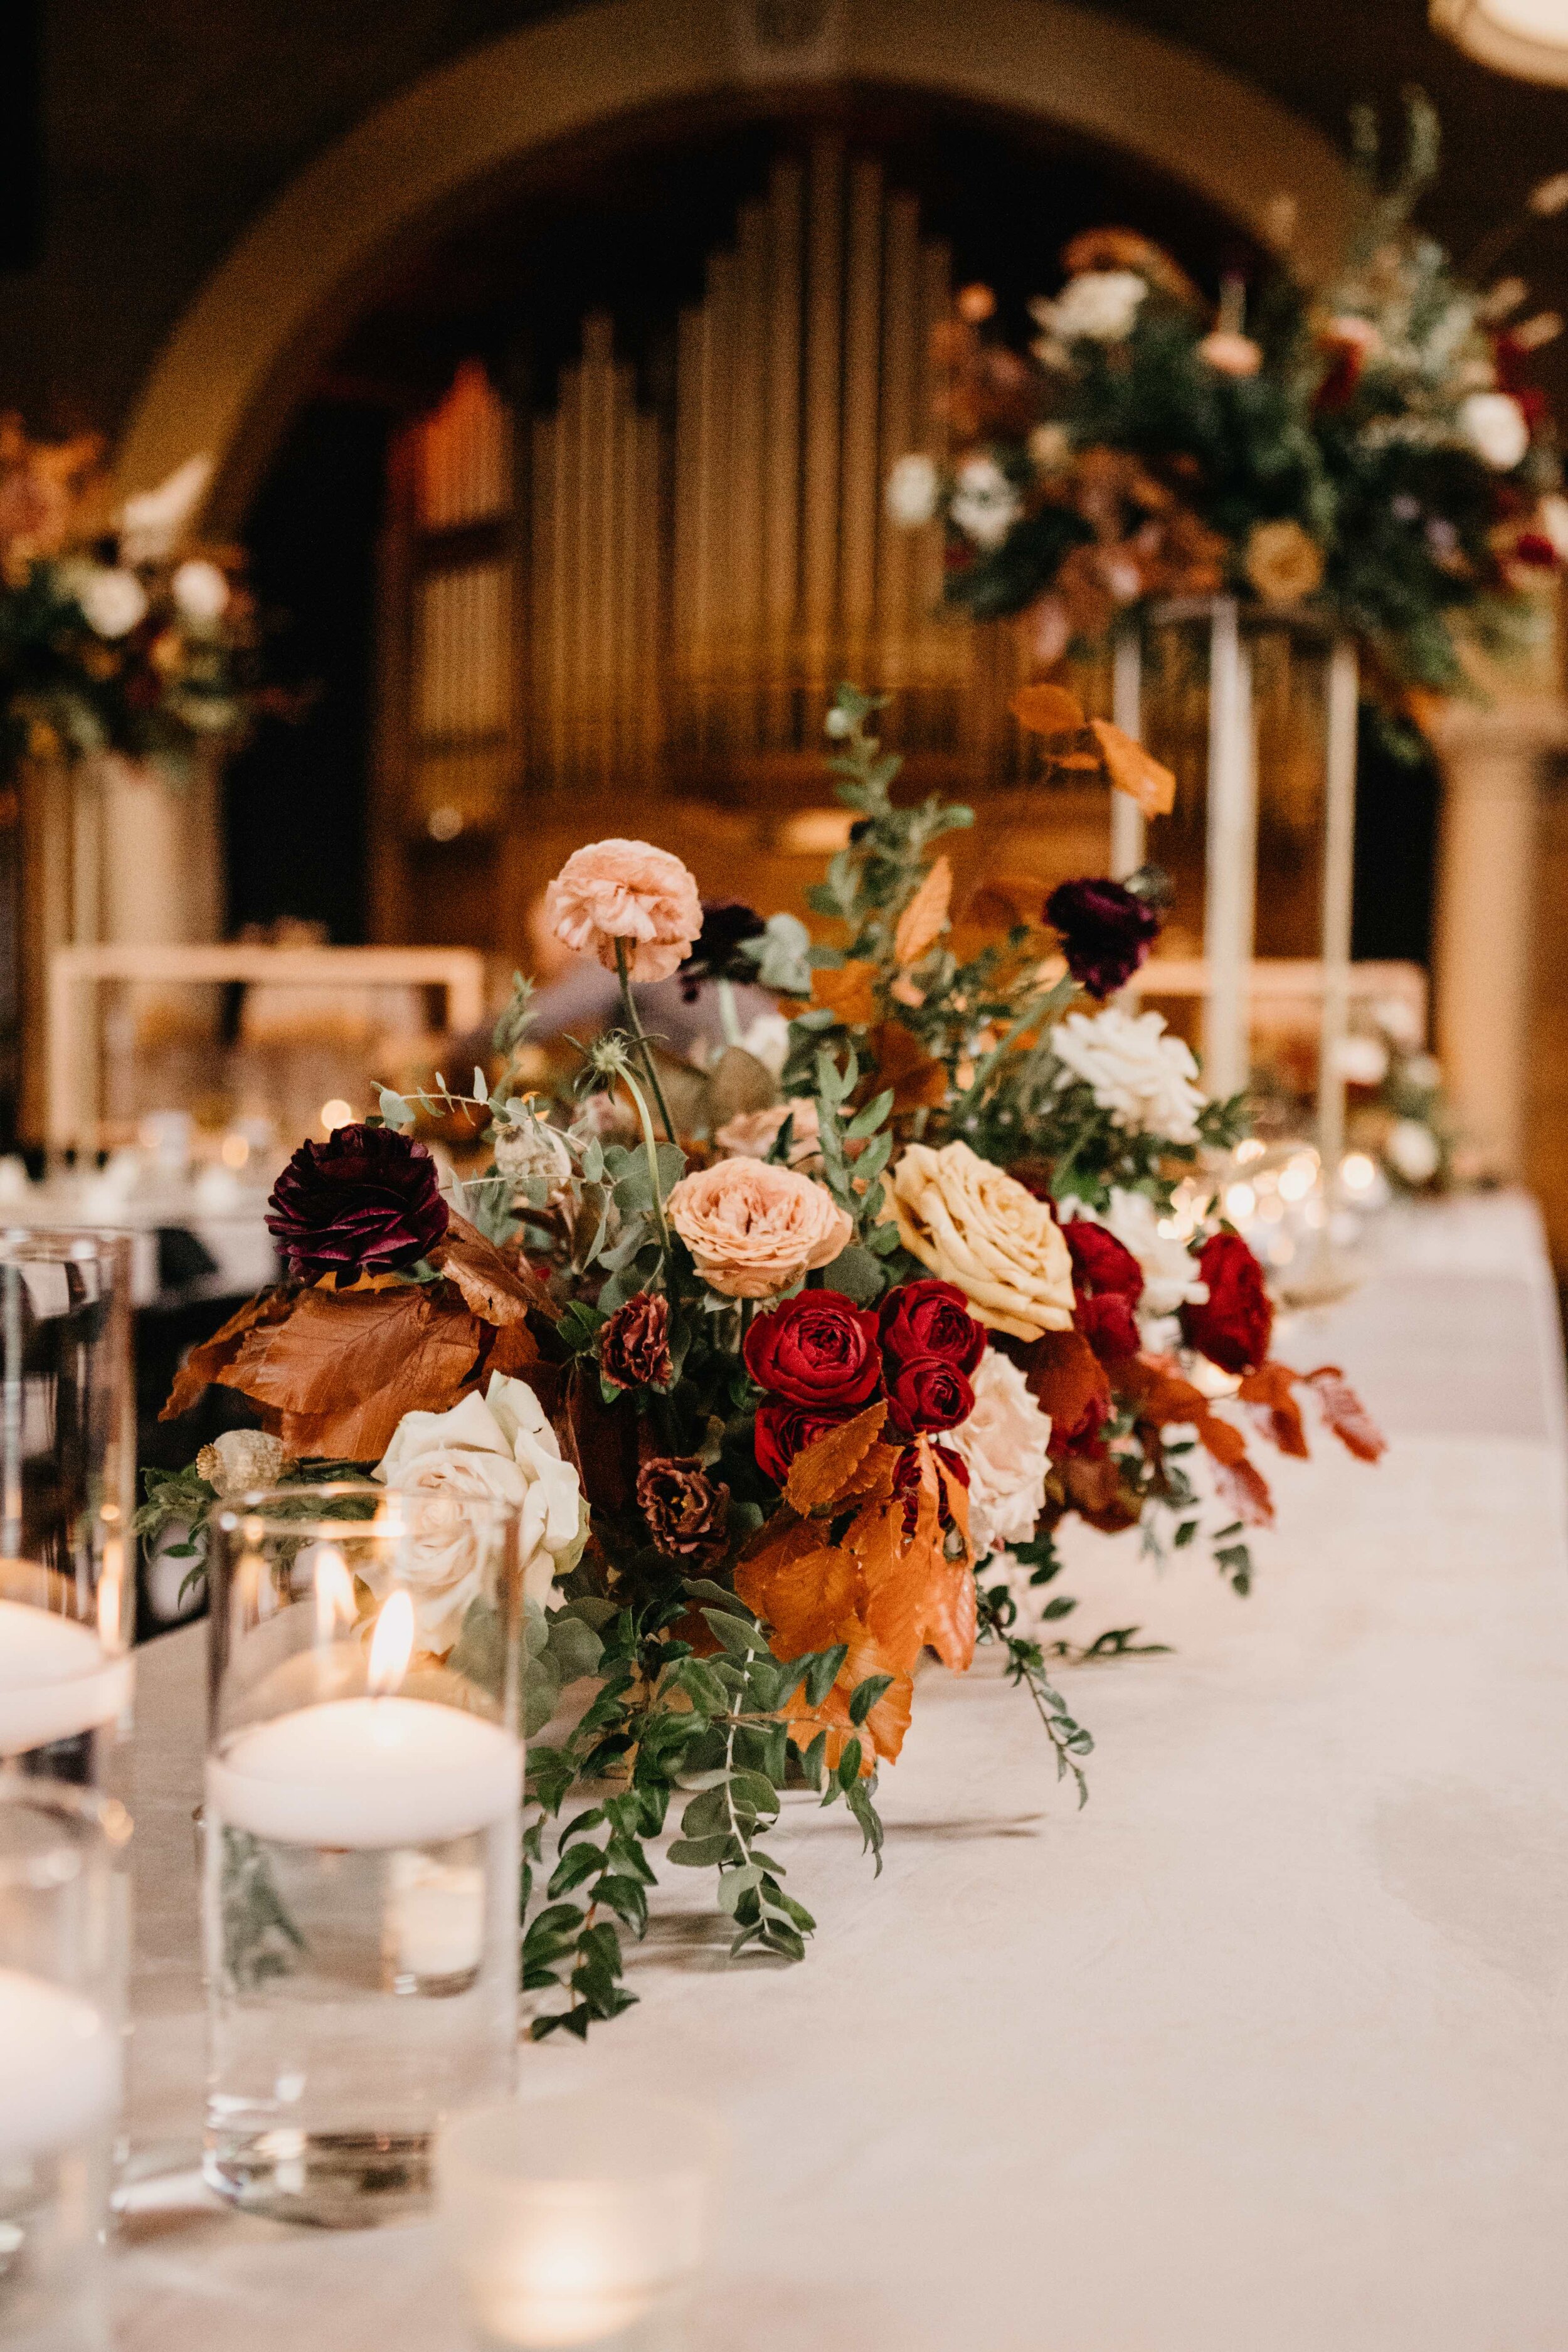 Modern gold stands with lush, asymmetrical floral arrangements using copper beech, pampas grass, garden roses, dahlias, and ranunculus in shades on rusty orange, burgundy, and muted earth tones. Nashville wedding floral design at Clementine.